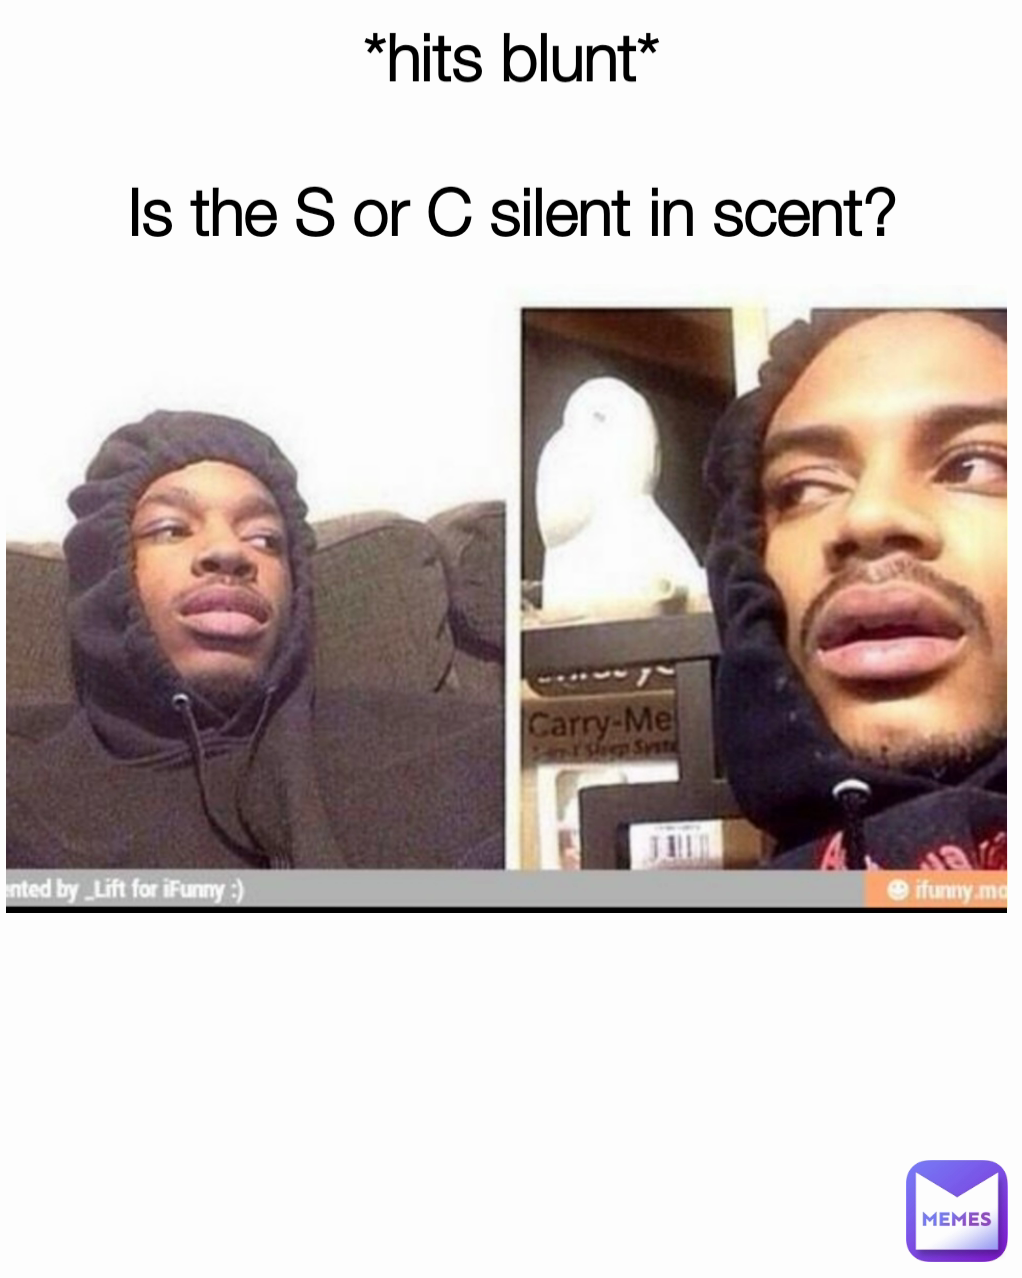 *hits blunt*

Is the S or C silent in scent?